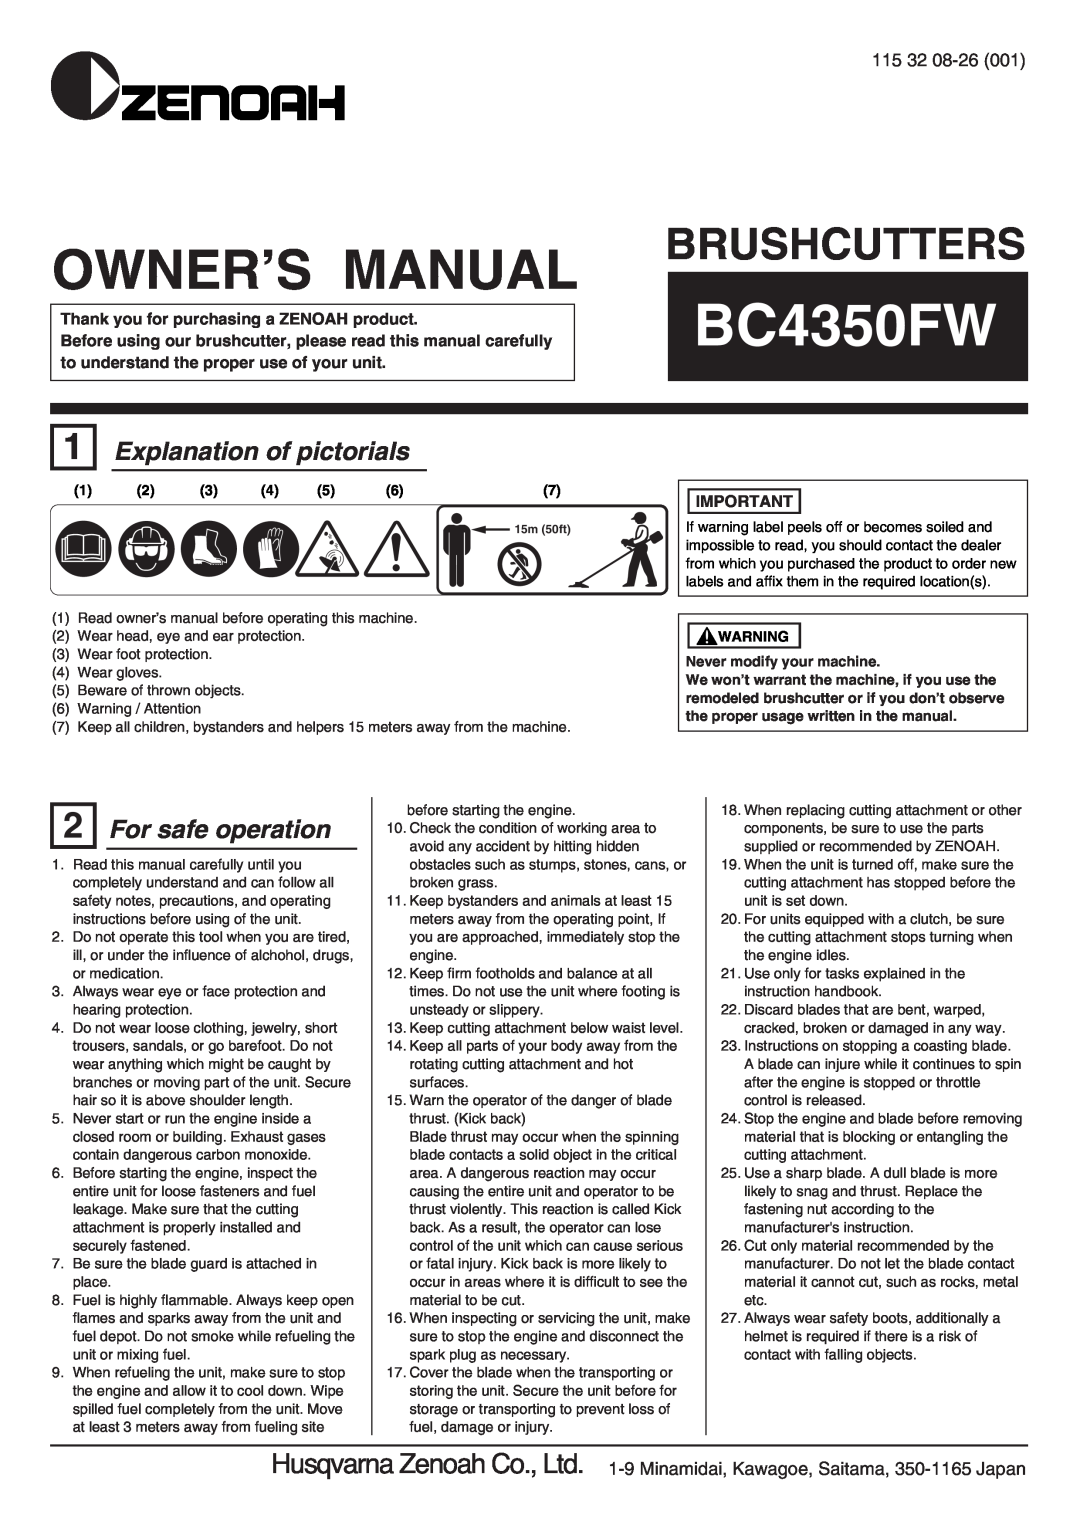 Zenoah BC4350FW owner manual Explanation of pictorials, For safe operation, Owner’S Manual, Brushcutters, 115 32 08-26 